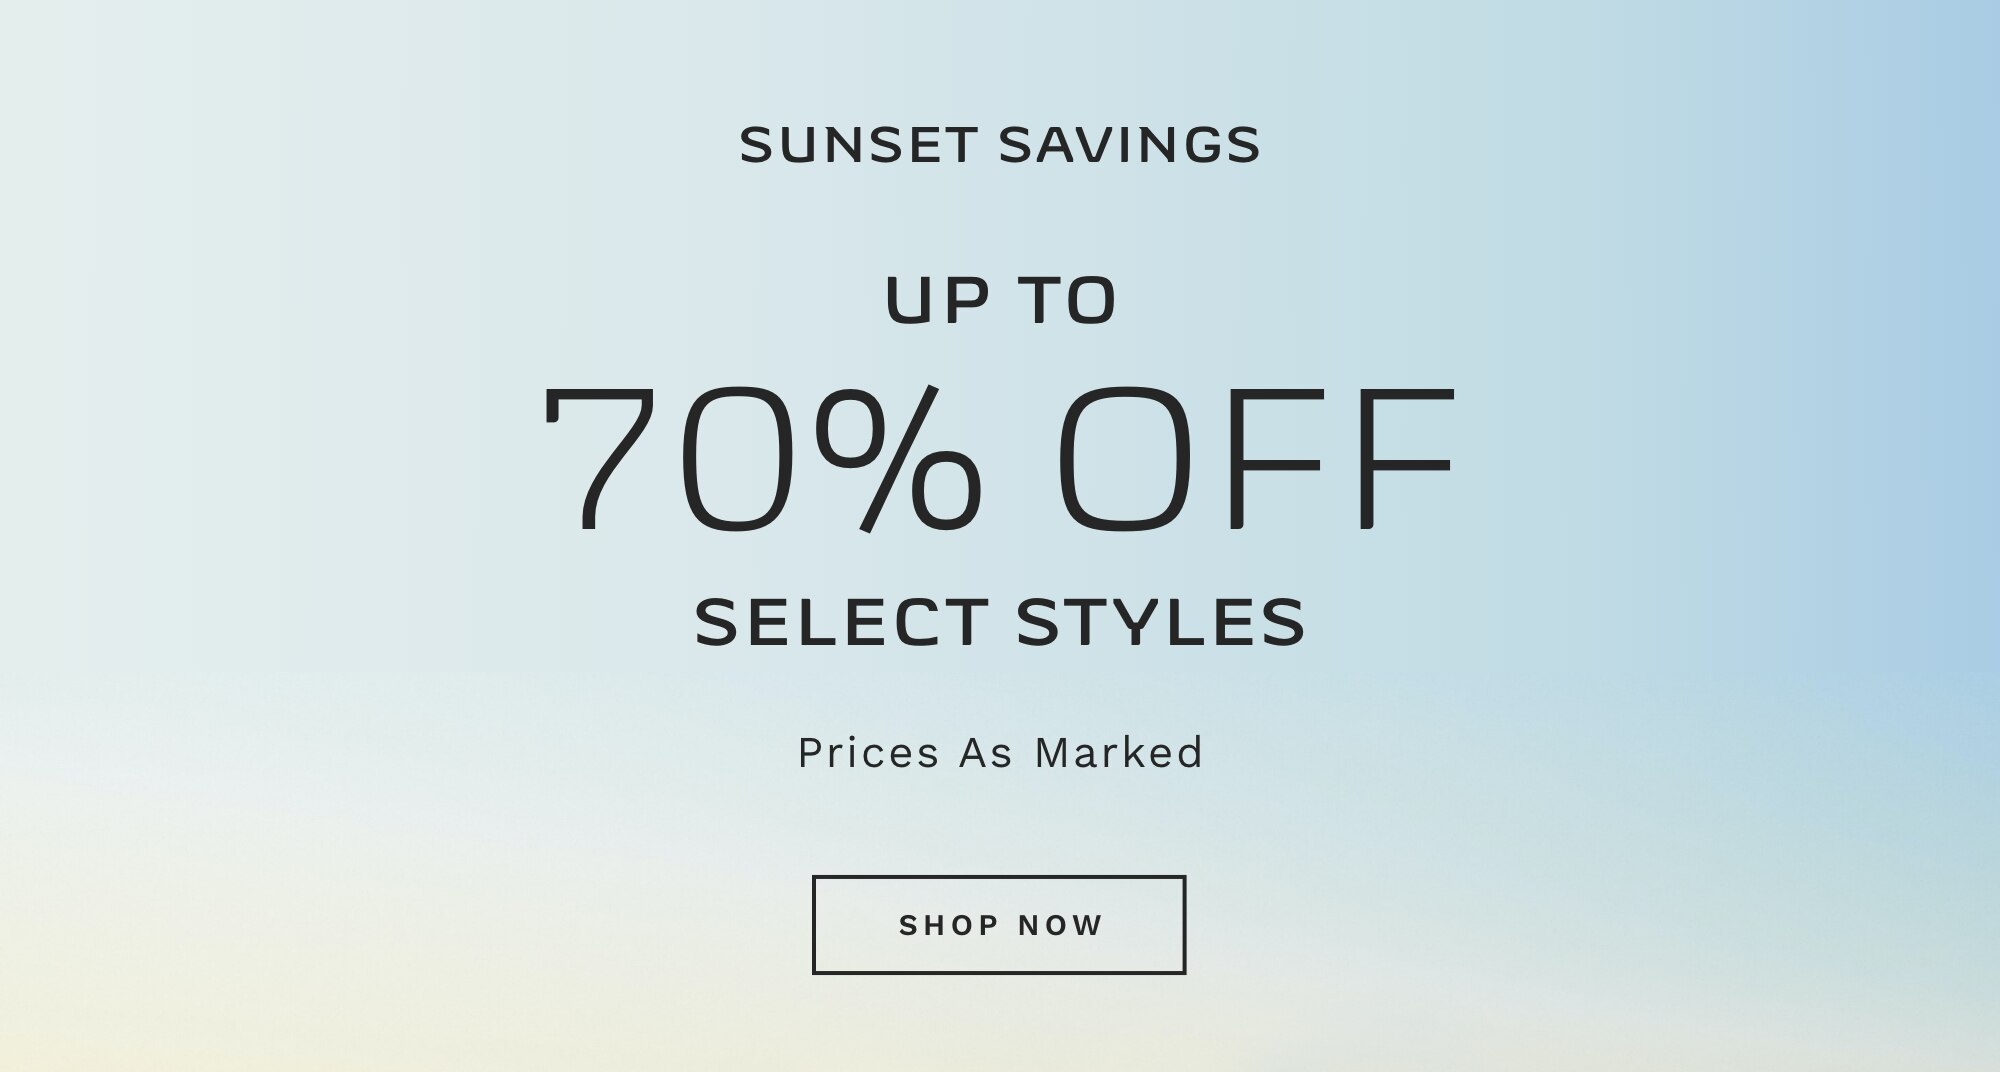 SUNSET SAVINGS UP TO 70% OFF SELECT STYLES Prices as Marked SHOP NOW